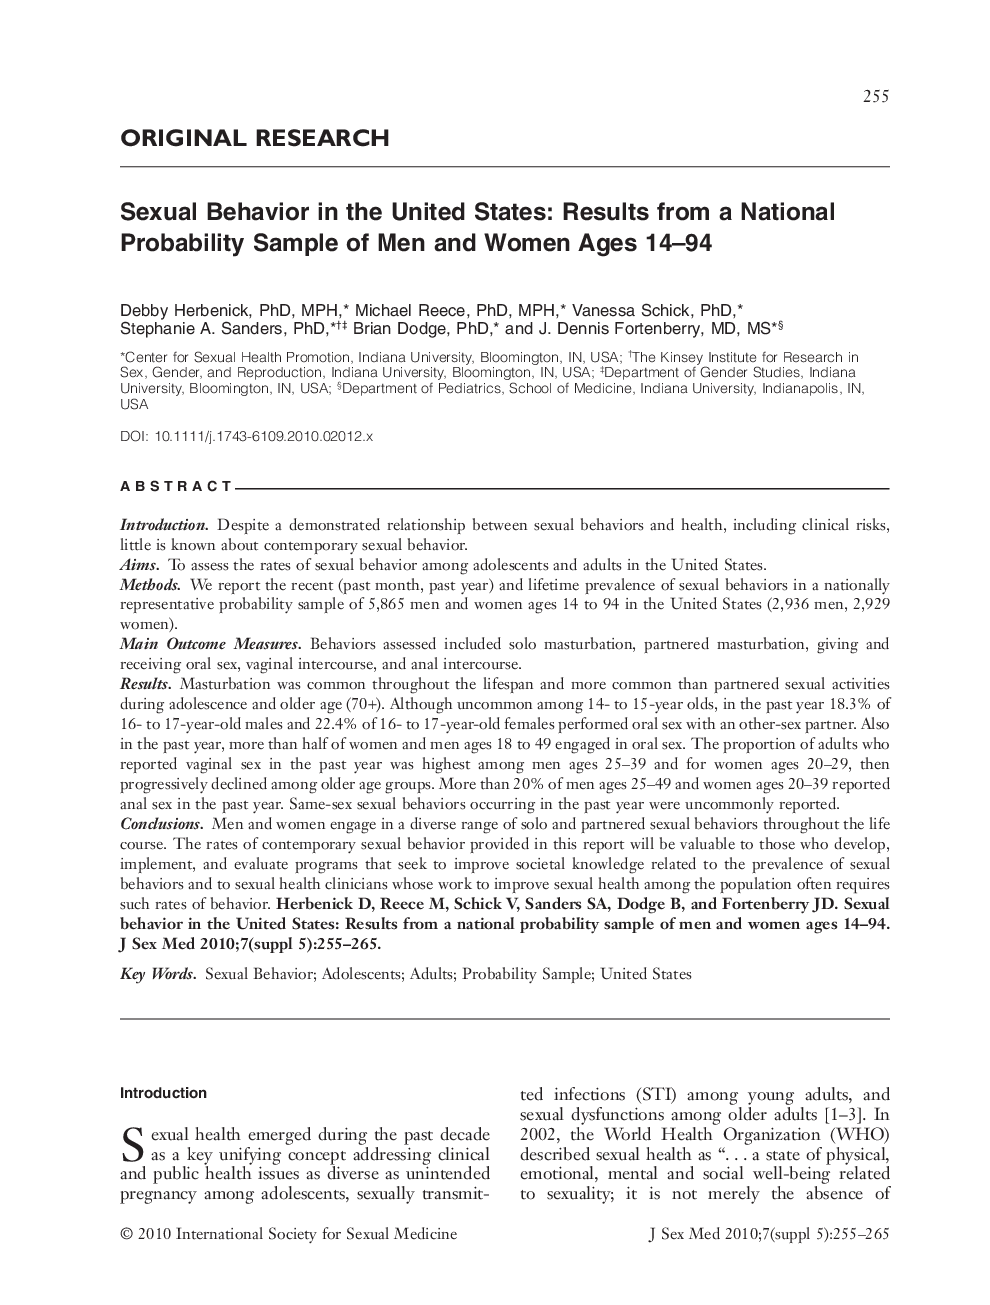 Sexual Behavior in the United States: Results from a National Probability Sample of Men and Women Ages 14-94